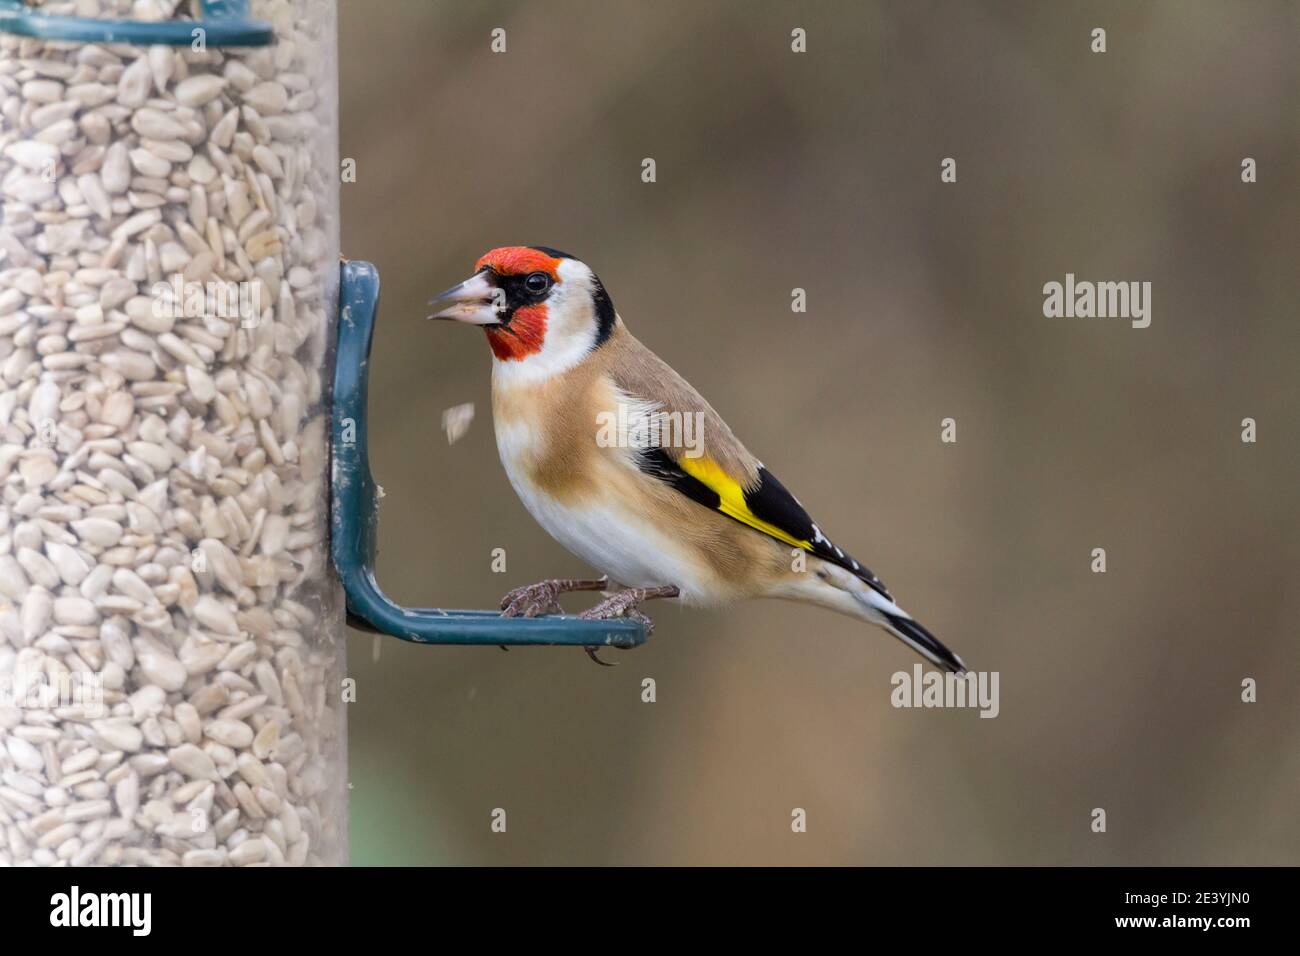 Goldfinch Carduelis carduelis striking banded black white and ruby red head brilliant yellow and black wings with white spots on tail feathers Stock Photo